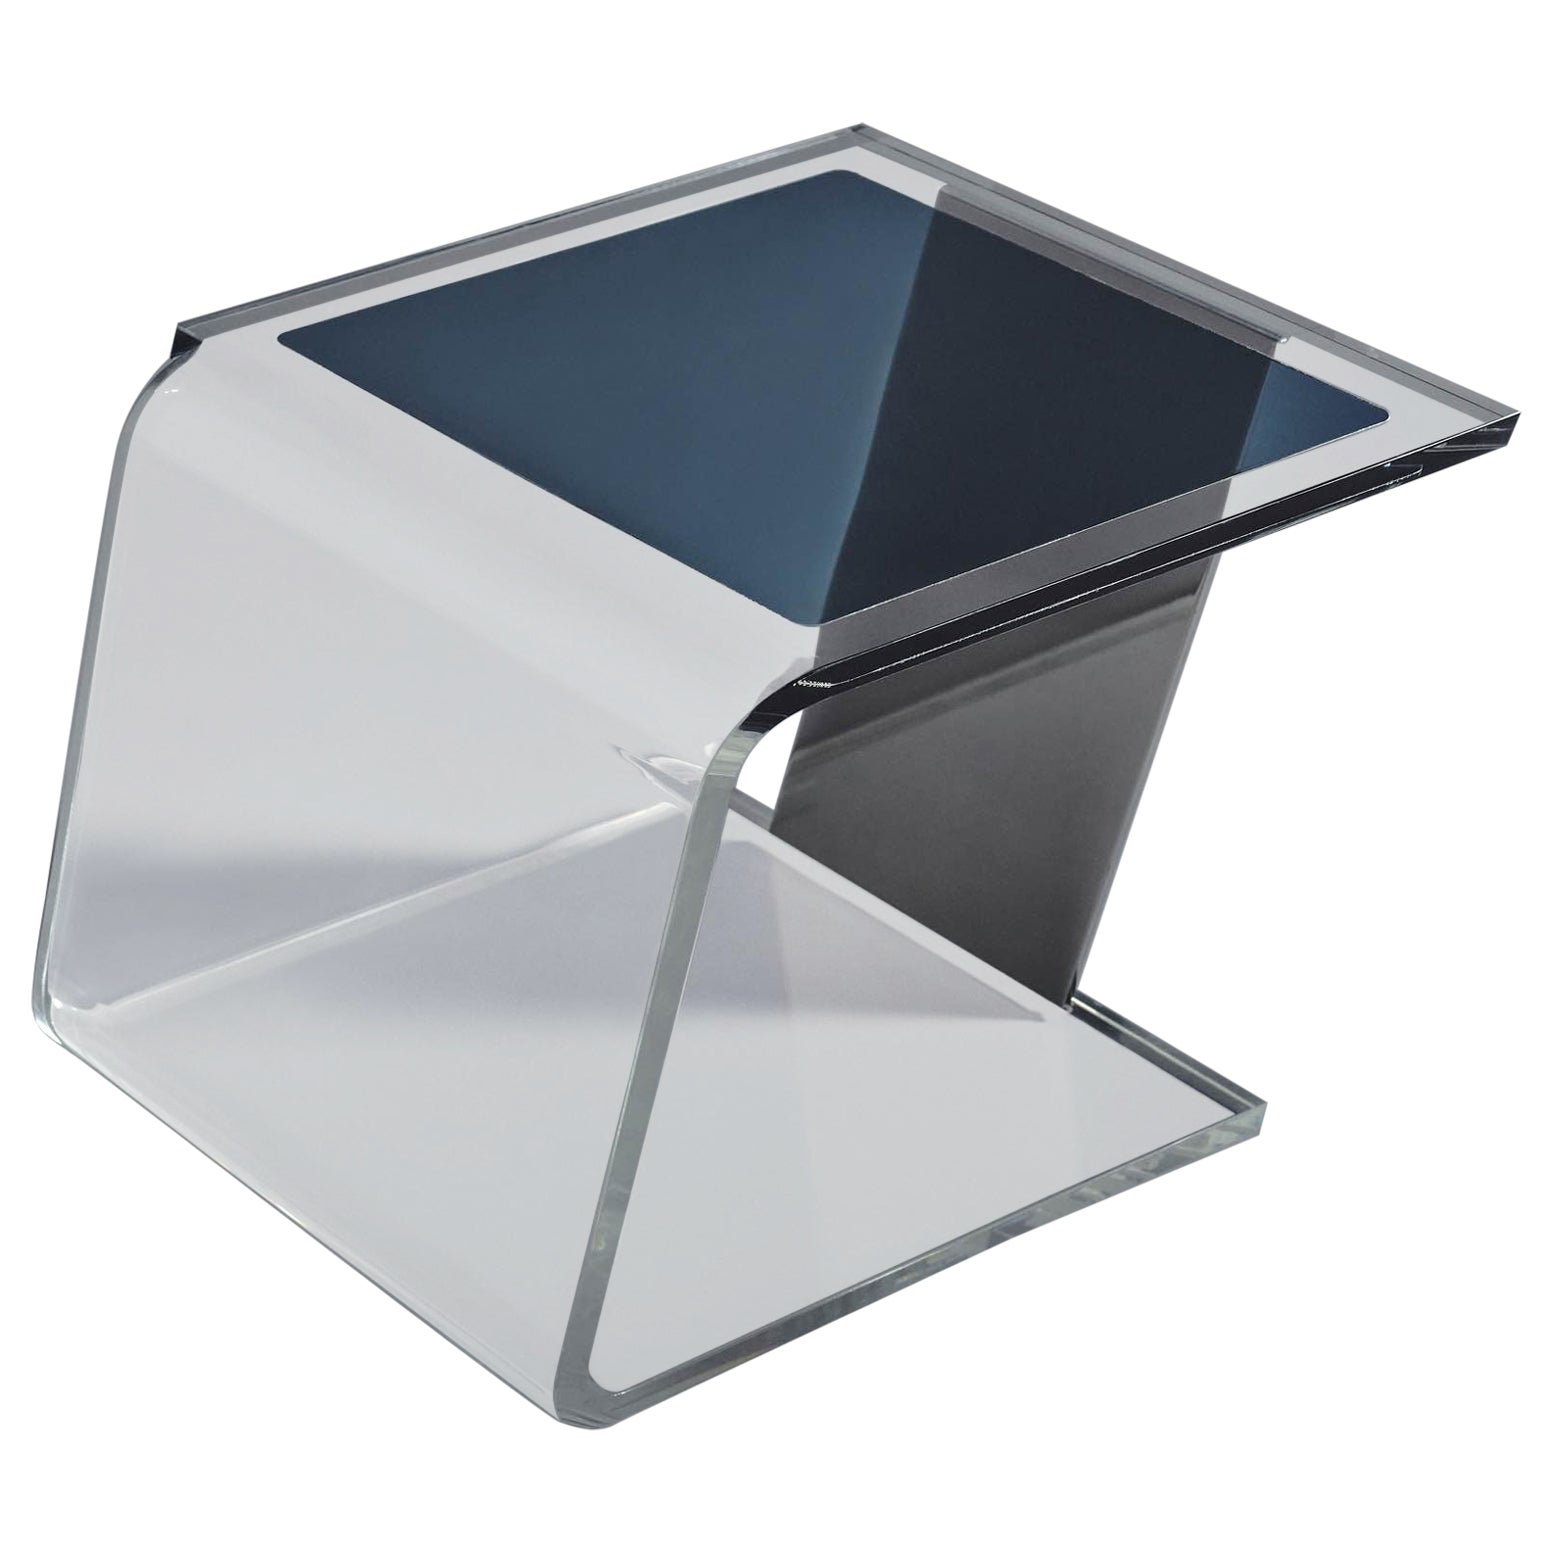 Stool Neo S in Dark Shadow, Acrylic Glass and Stainless Steel For Sale